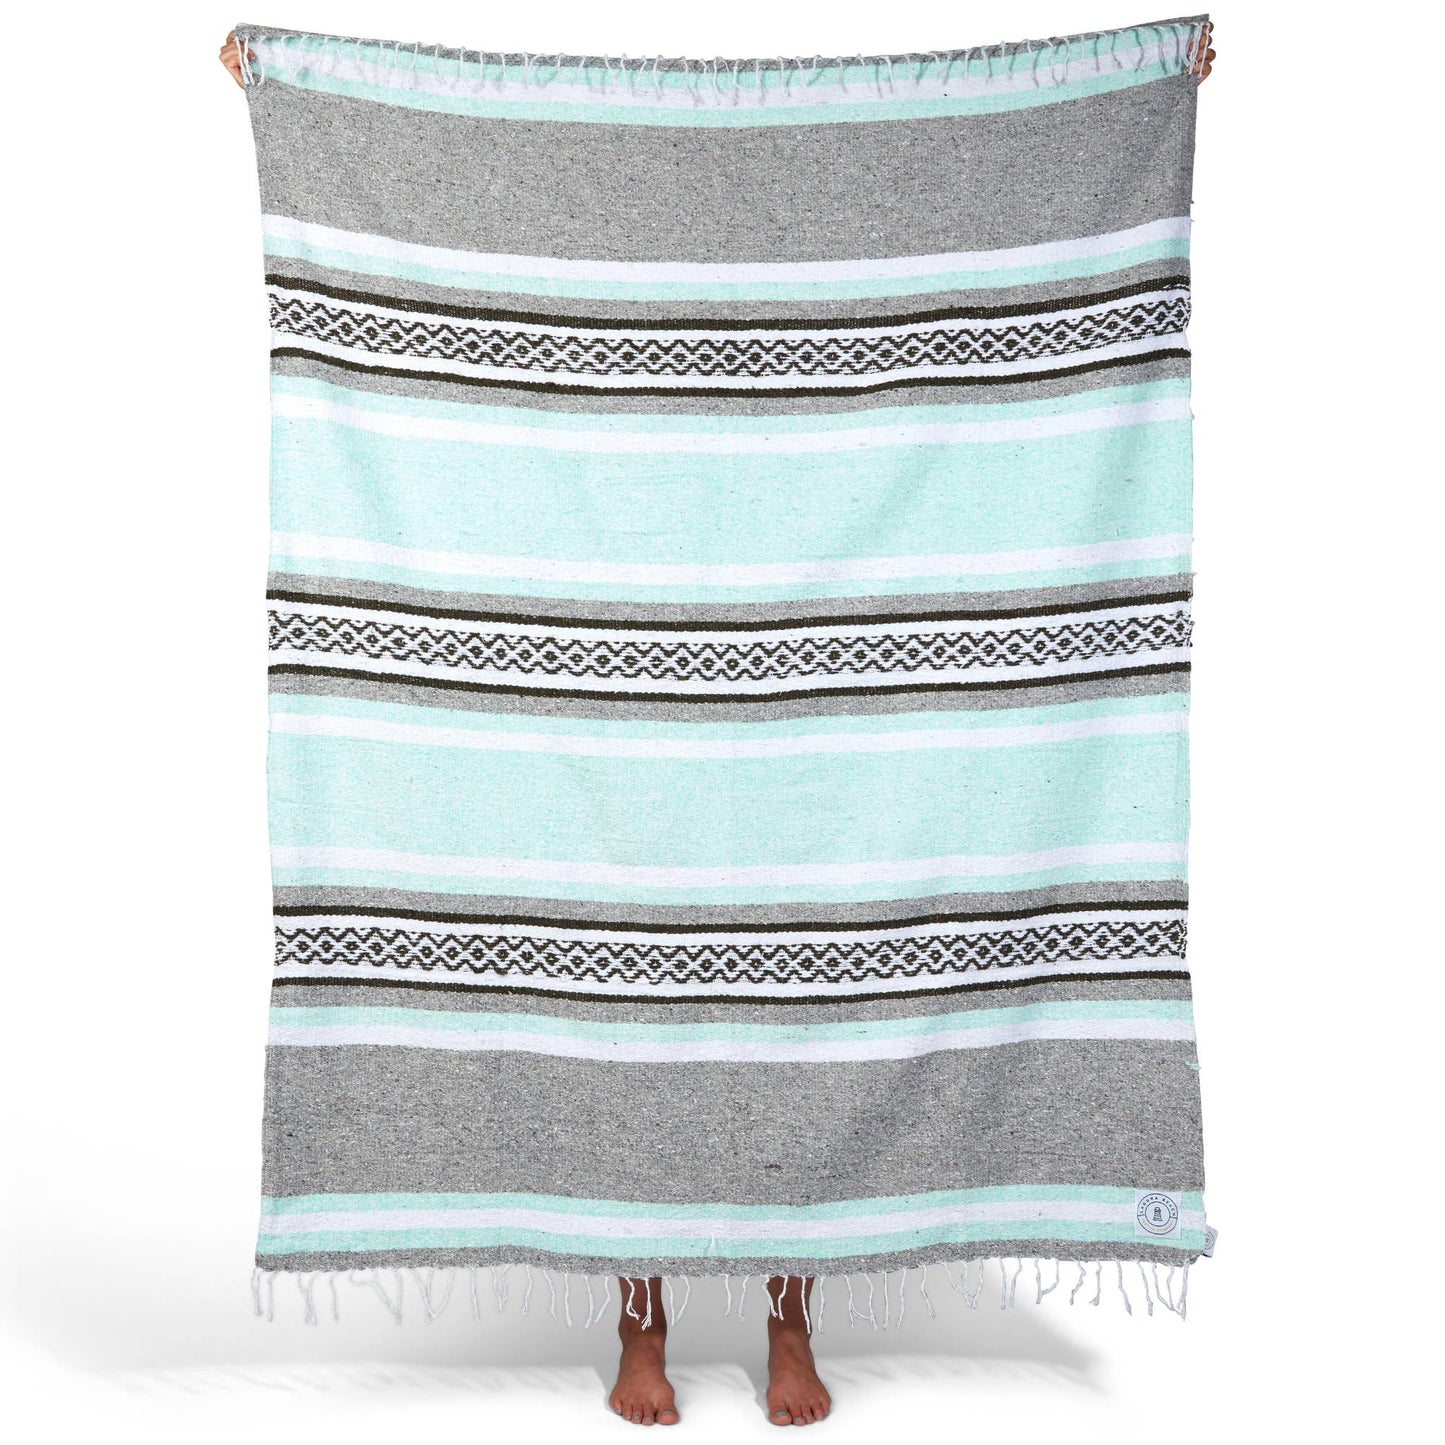 Mexican Serape Blanket in gray and bright blue by Laguna Textile Co